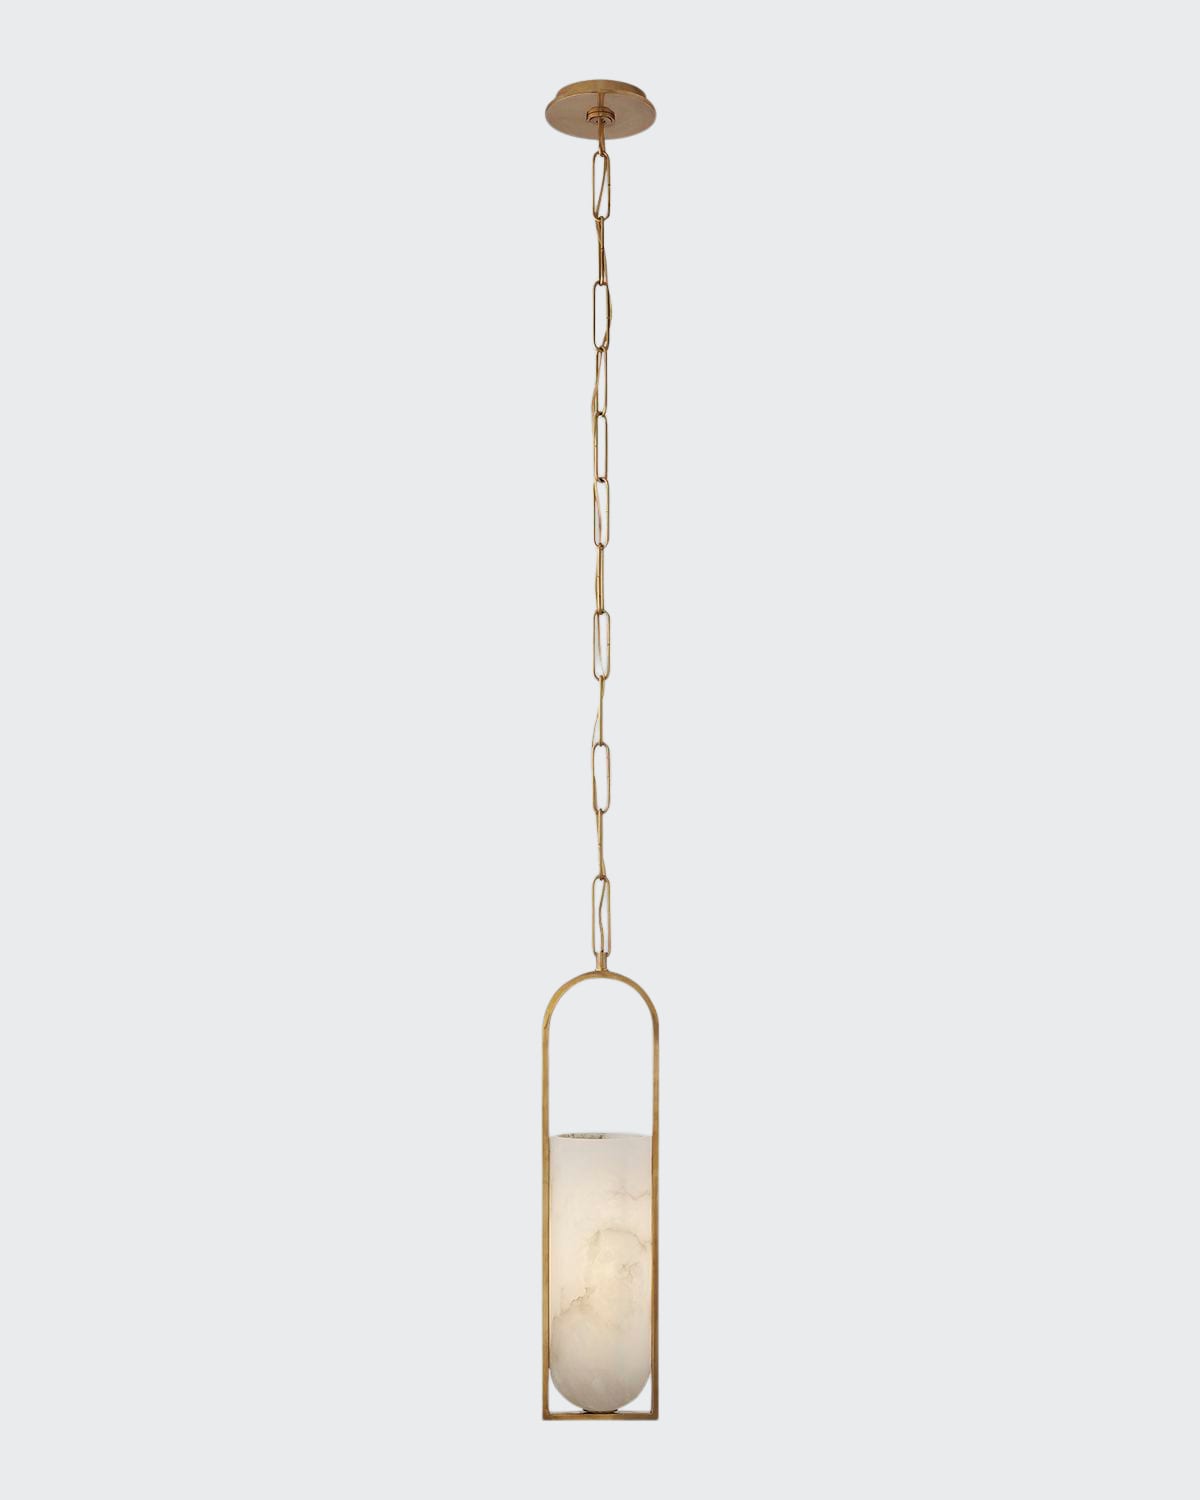 Kelly Wearstler For Visual Comfort Signature Melange Small Elongated Pendant In Antique Brass